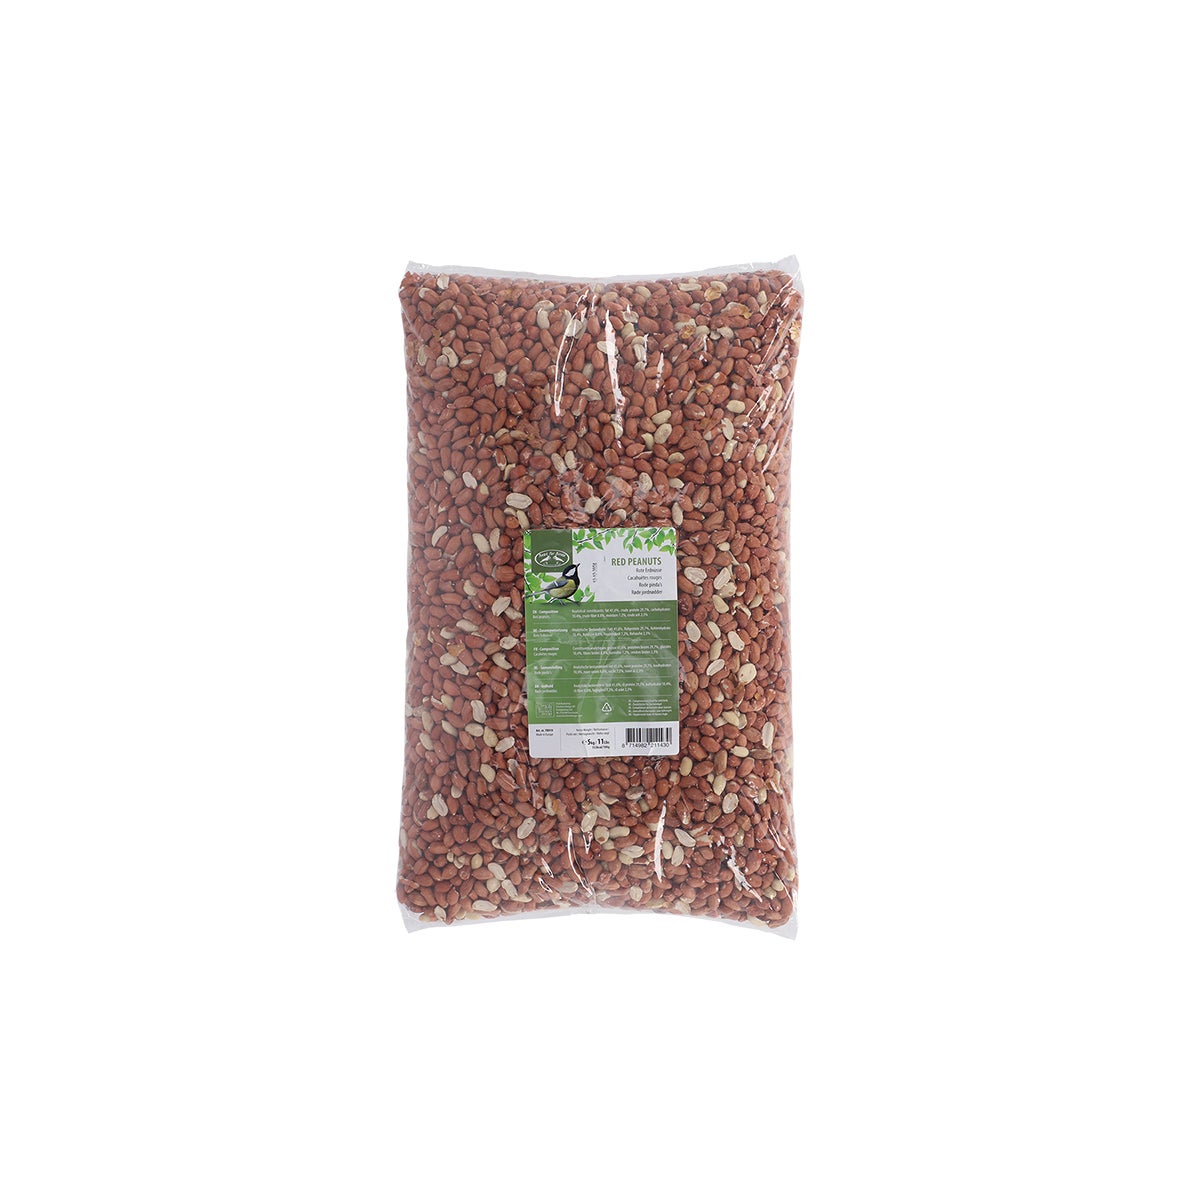 Red Shelled Peanuts 5 Kg